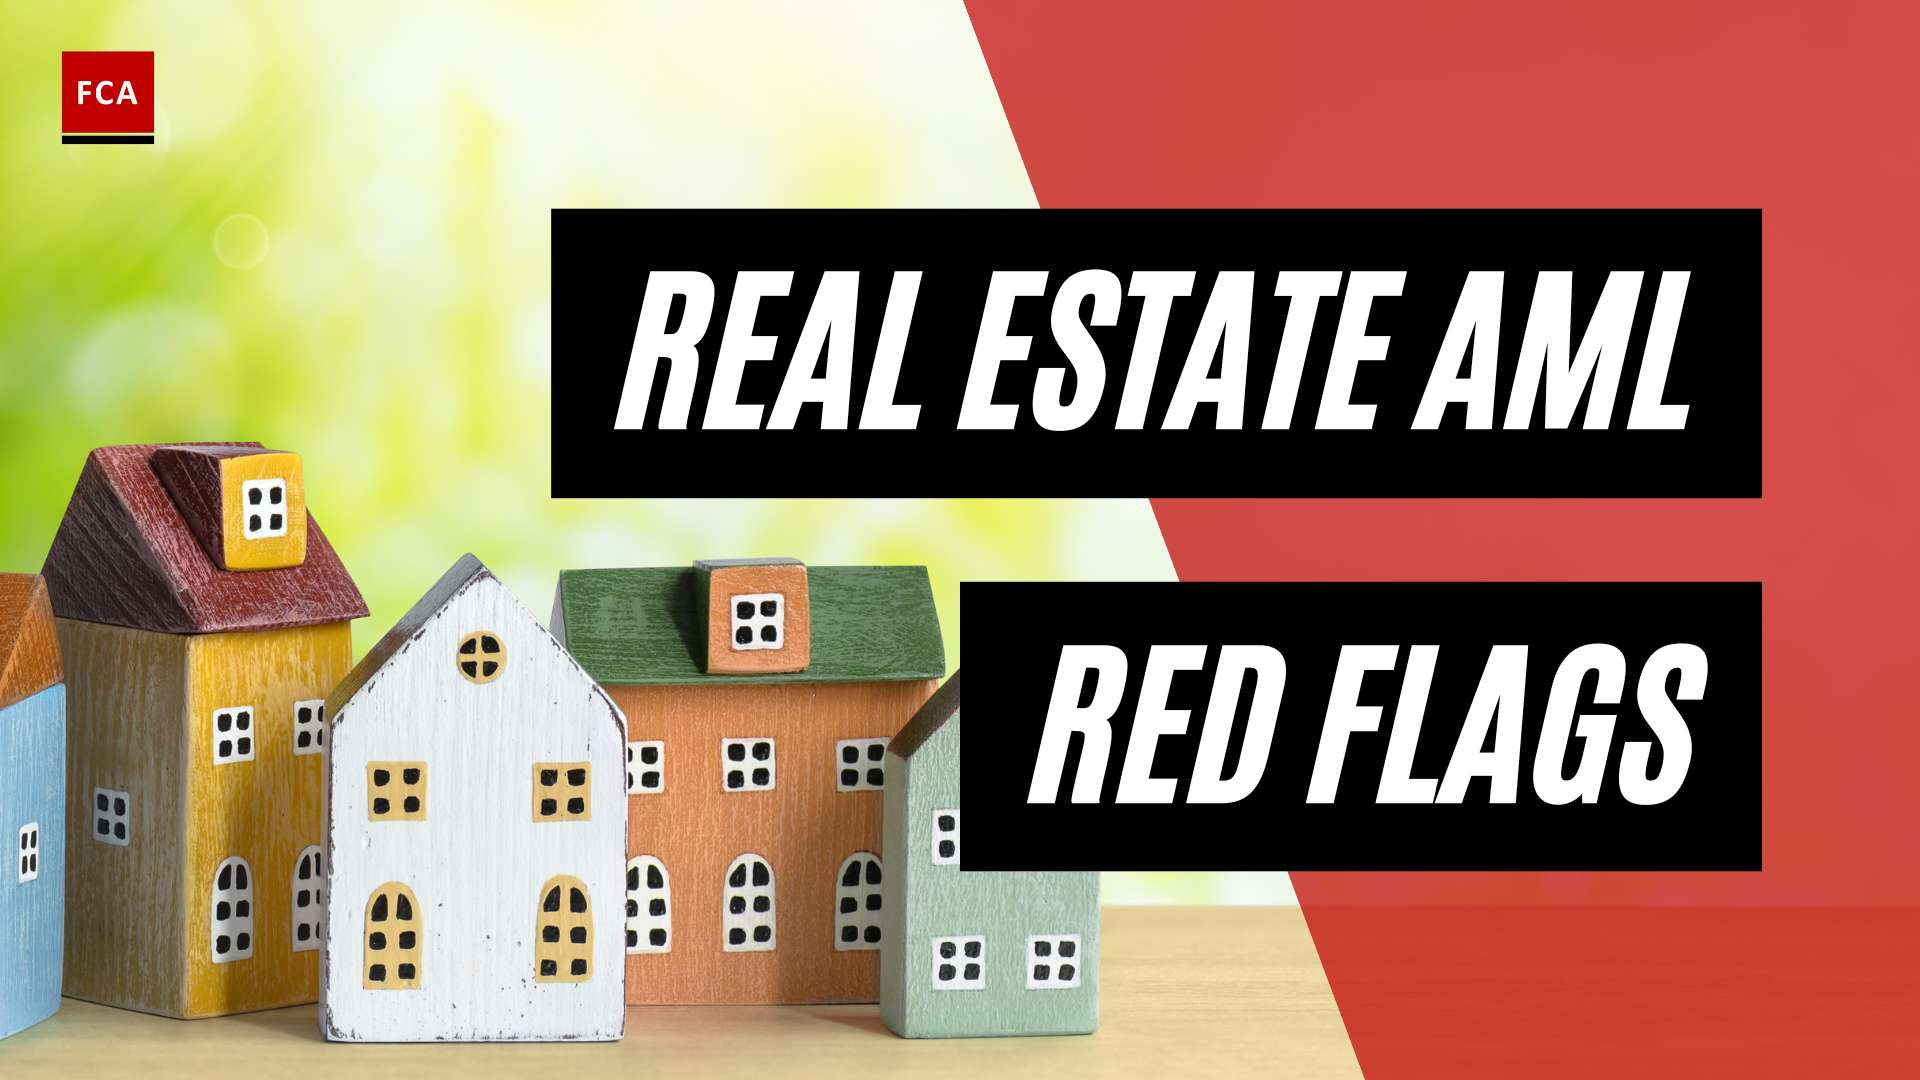 Spotting Suspicious Signs: Red Flags For Aml In Real Estate Transactions